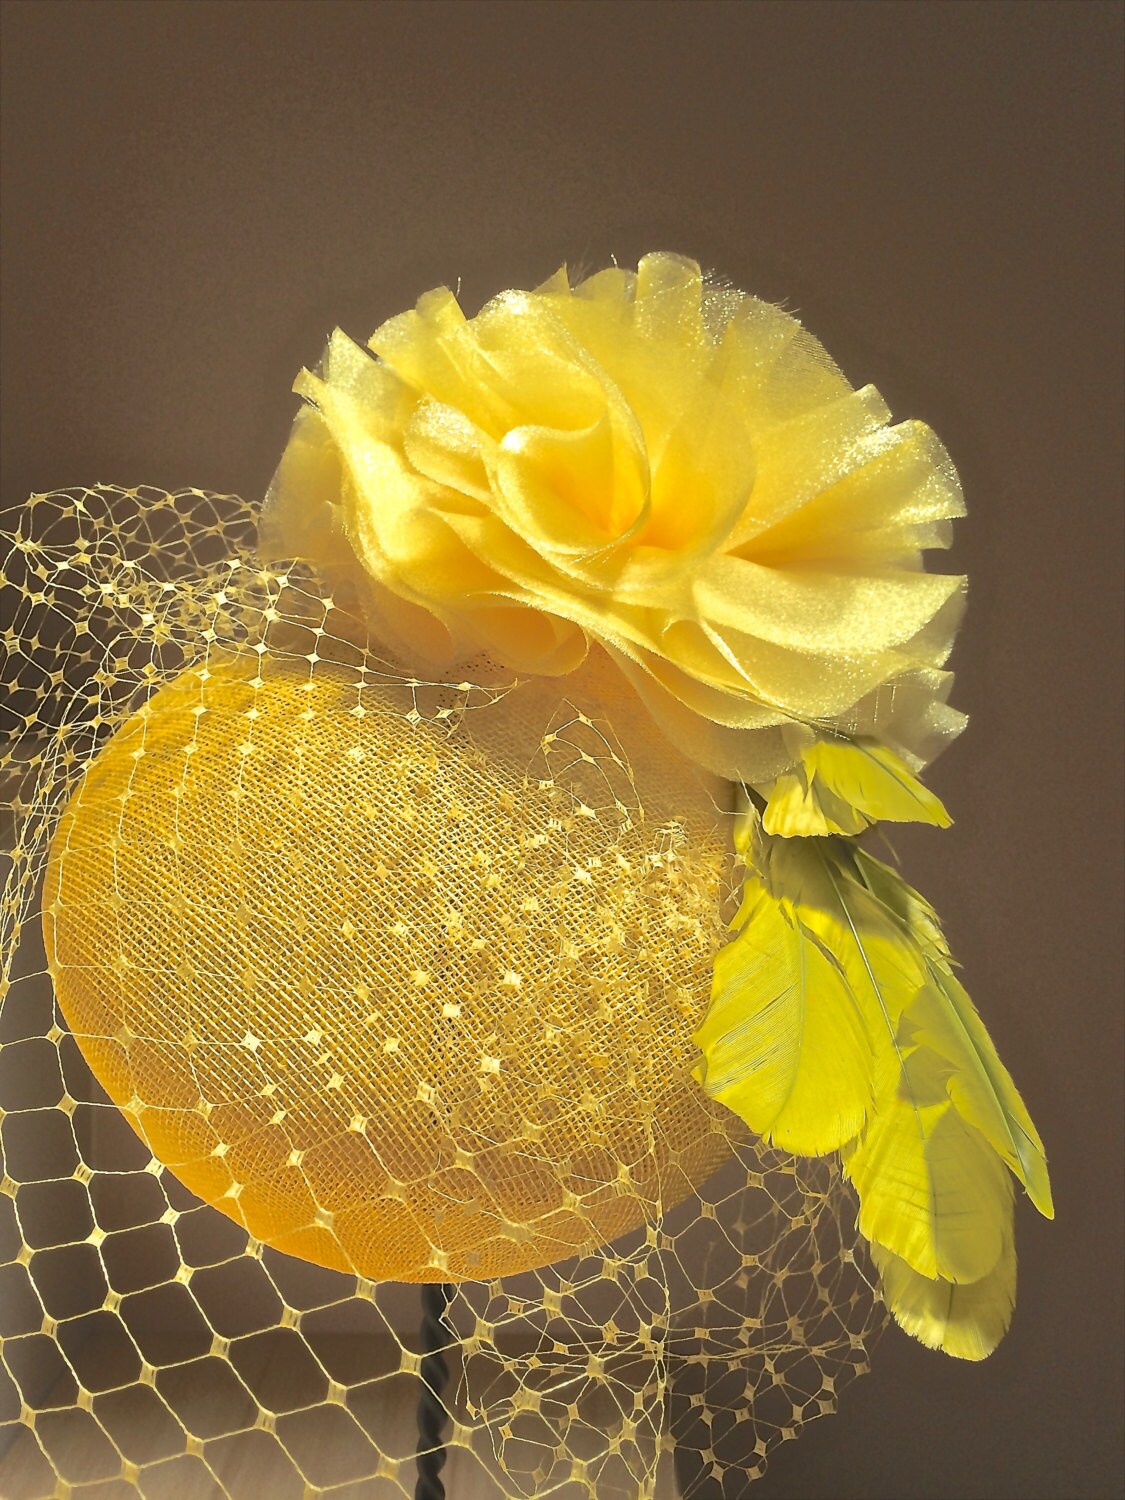 Yellow Sinamay Pill Box Hat with Veiling, Canary Yellow hat, Church hat, Veiling.Wedding fascinator, Royal Ascot, KentuckyDerby, Race Hat